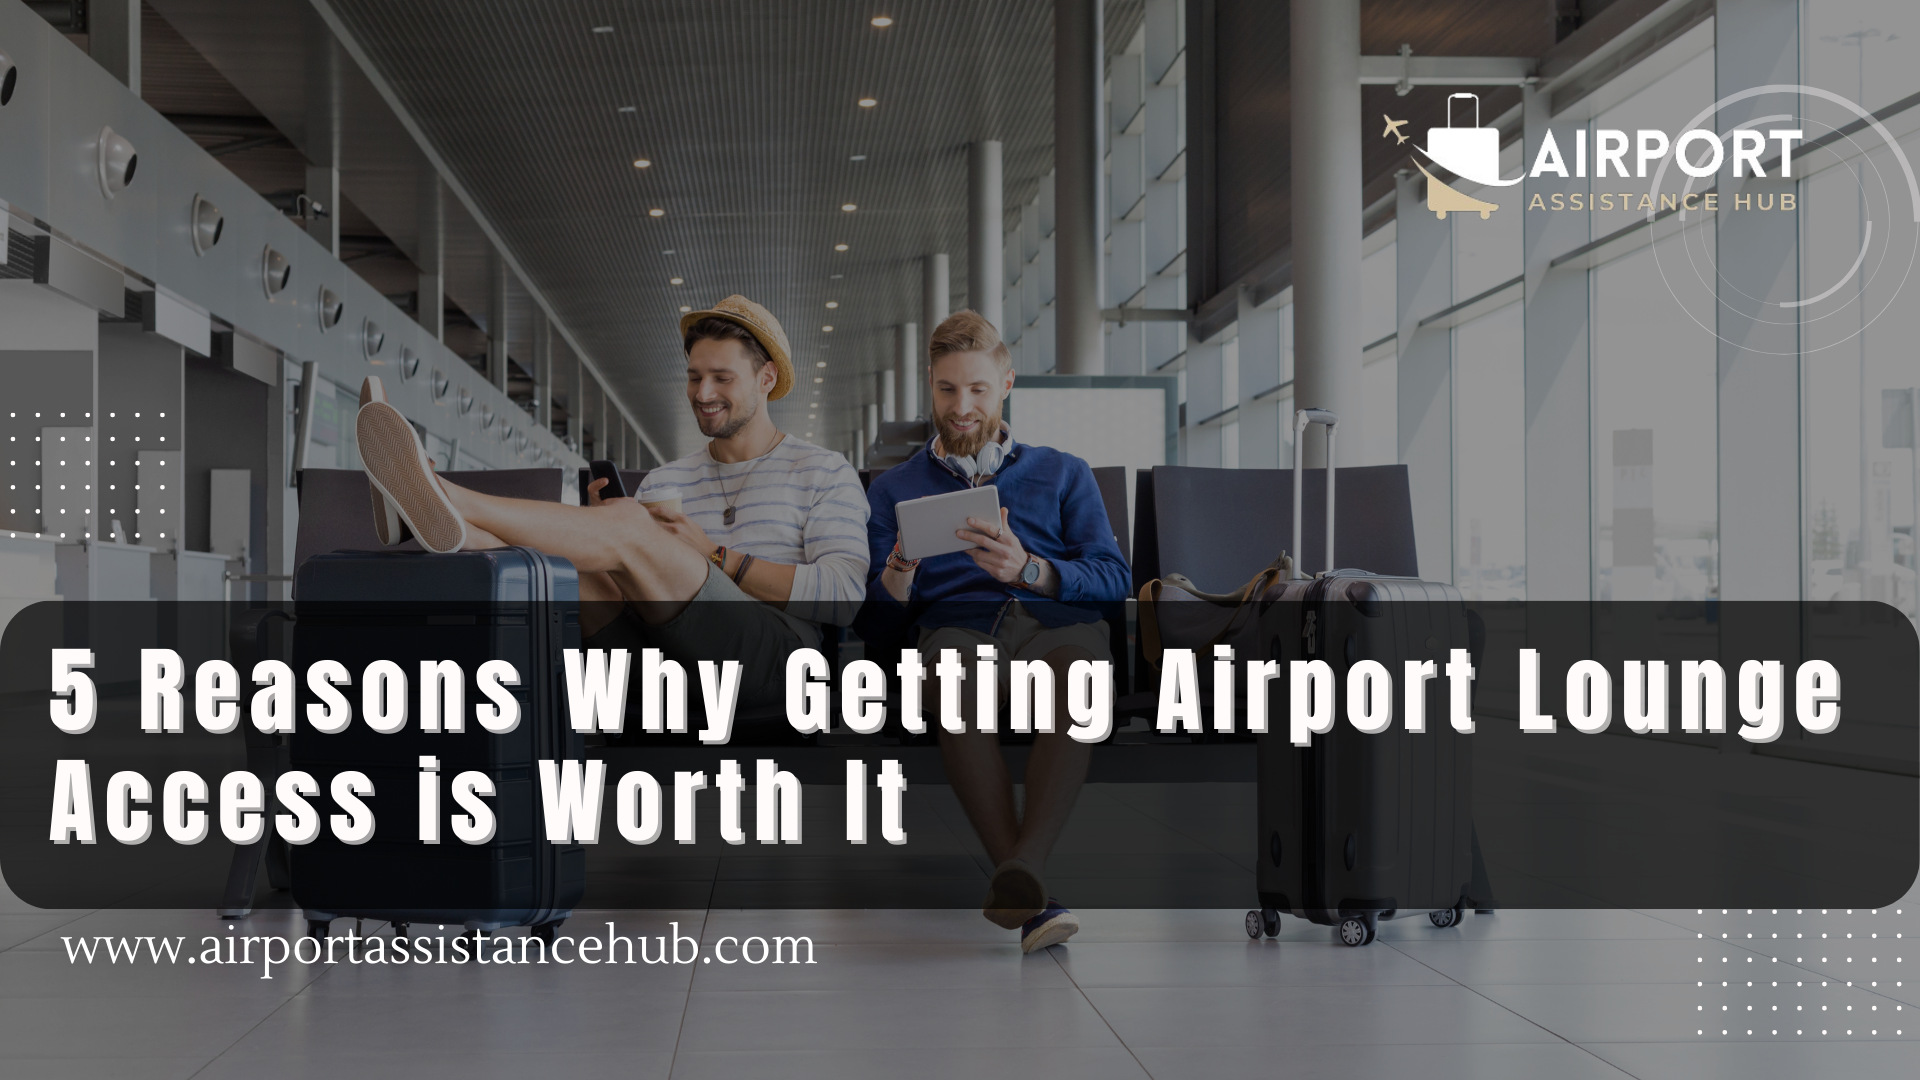 5 Reasons Why Getting Airport Lounge Access is Worth It